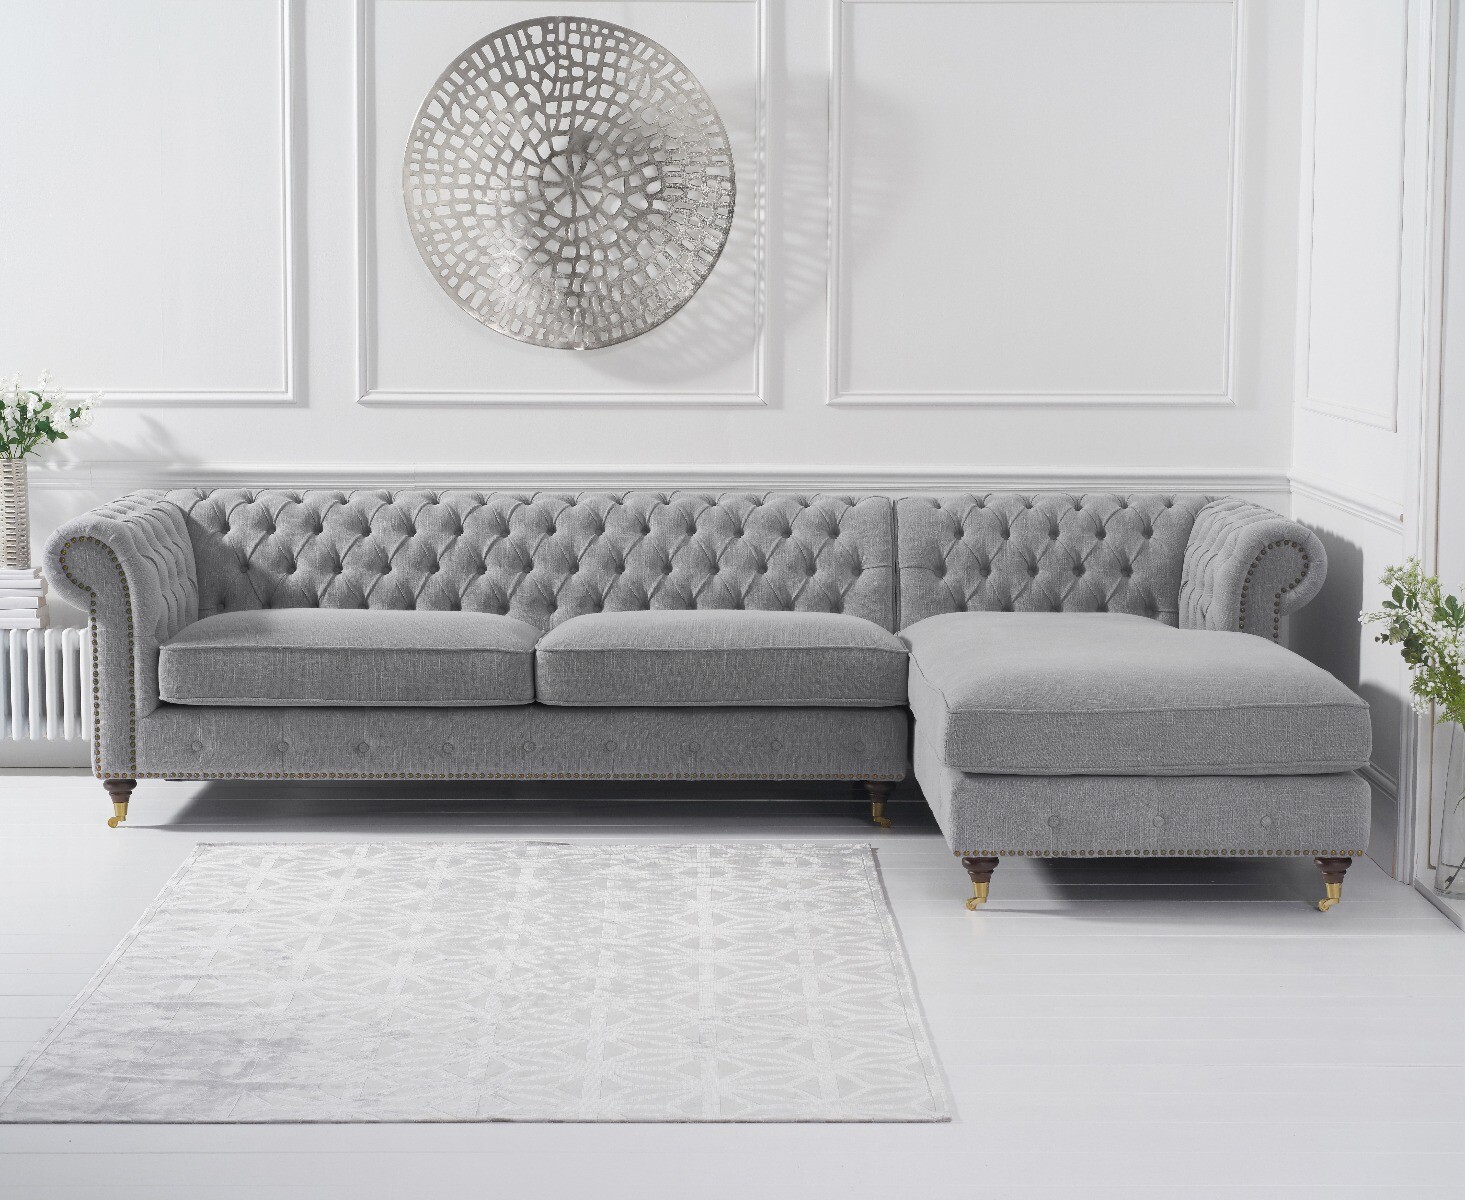 Photo 1 of Chiswick extra large grey linen right facing chesterfield corner chaise sofa